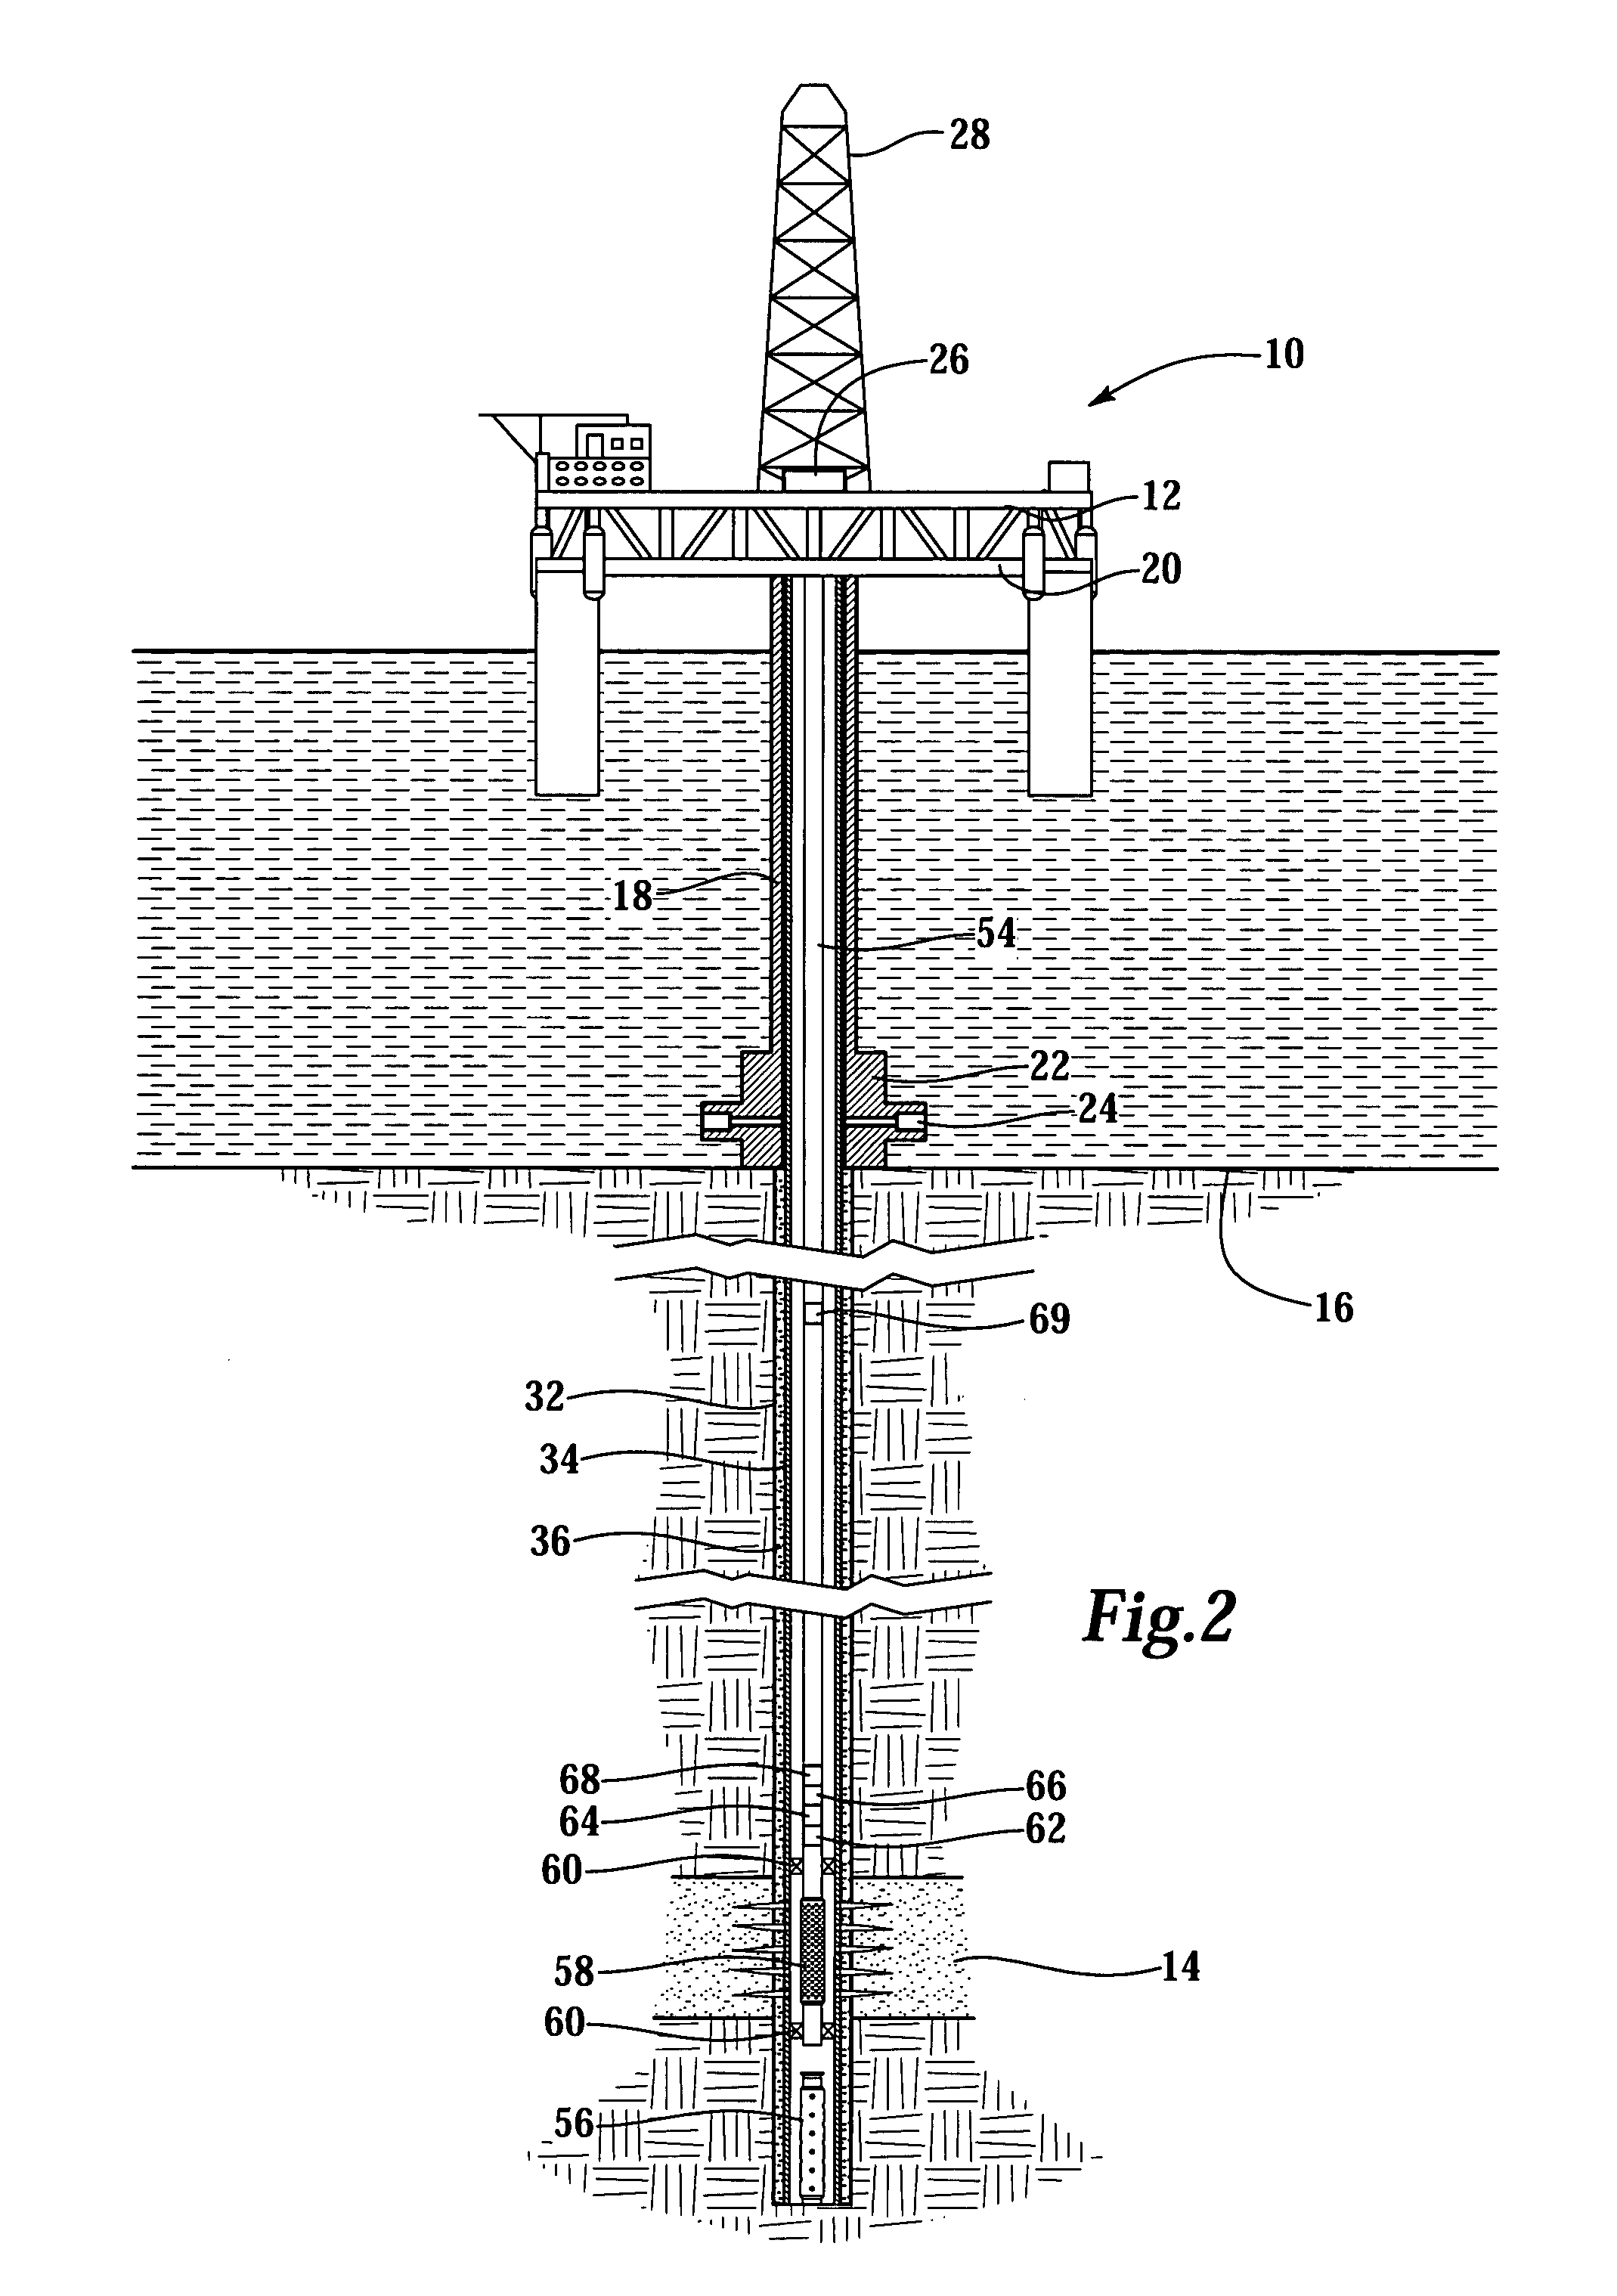 Downhole seal element formed from a nanocomposite material